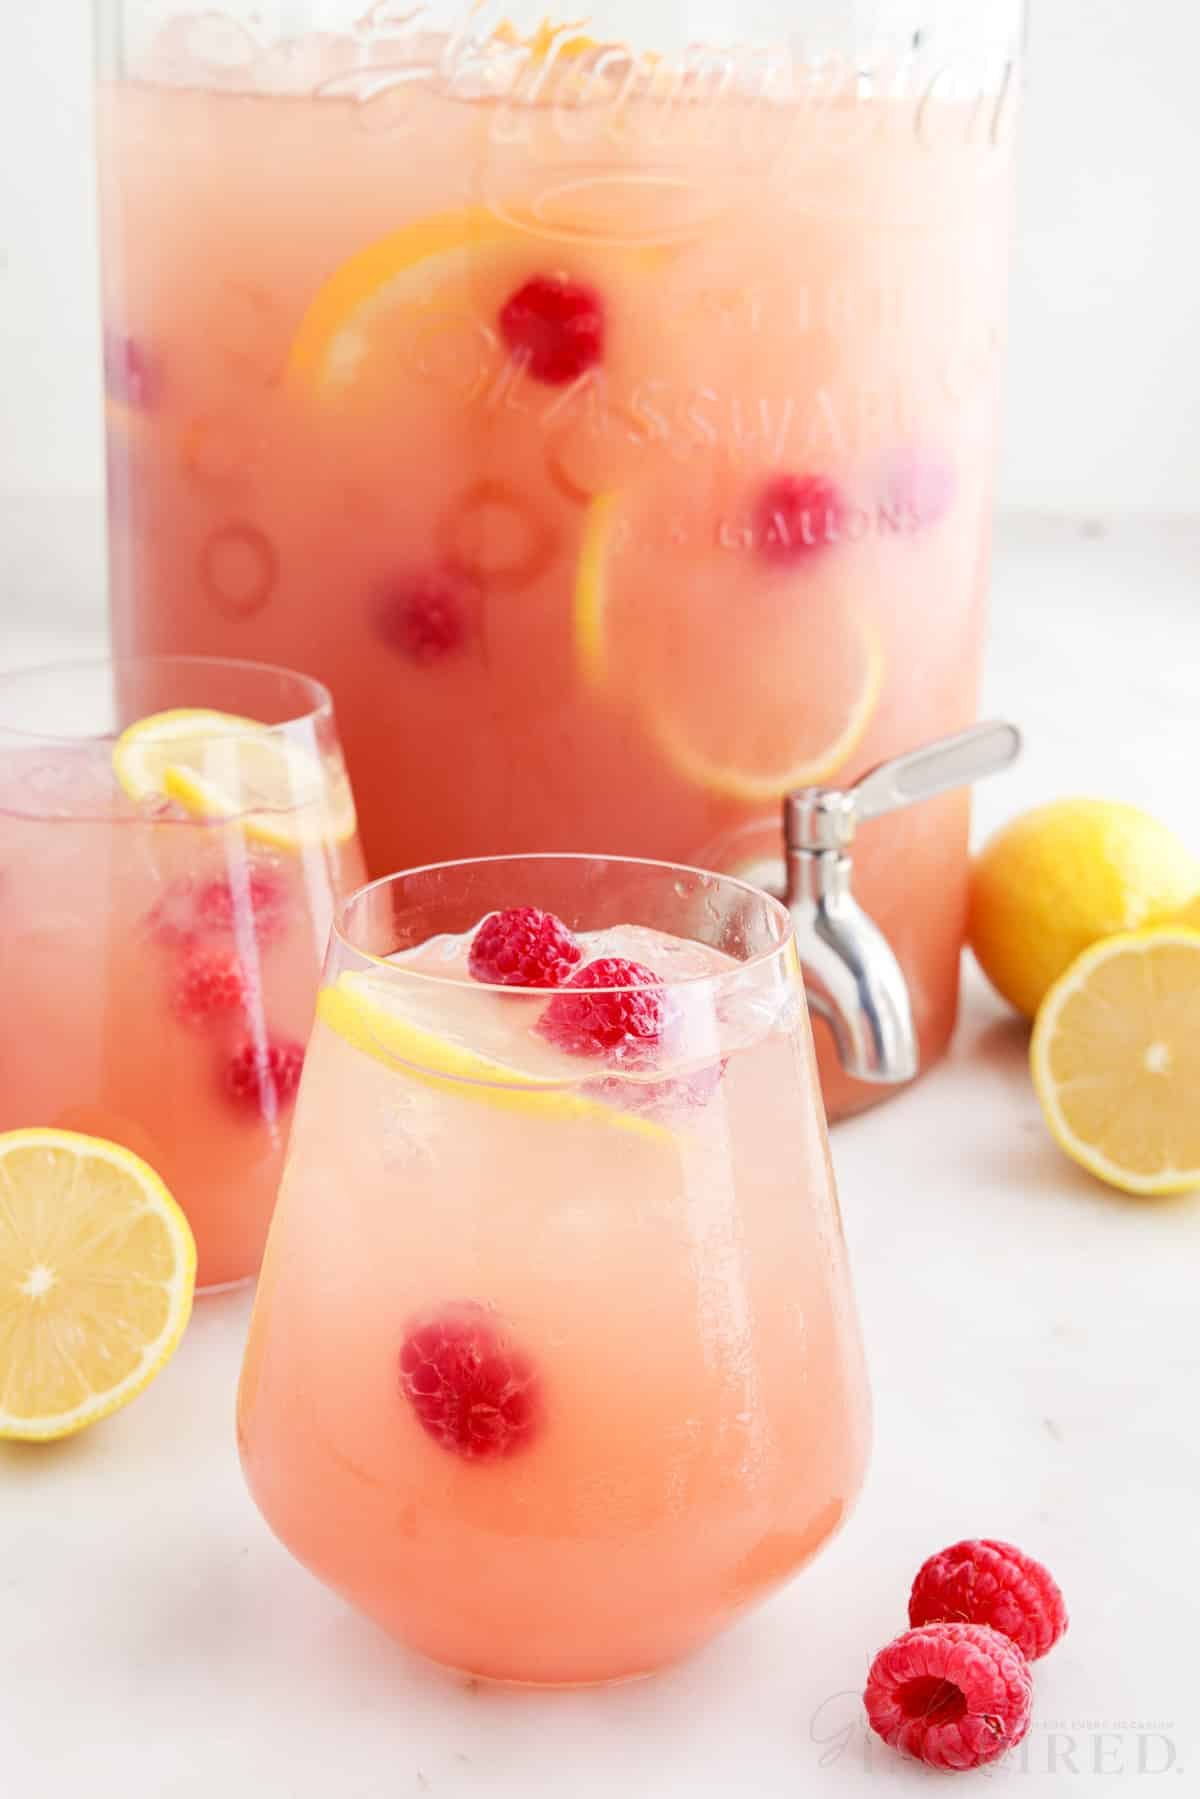 Glasses filled with party punch in front of a large glass beverage dispenser.